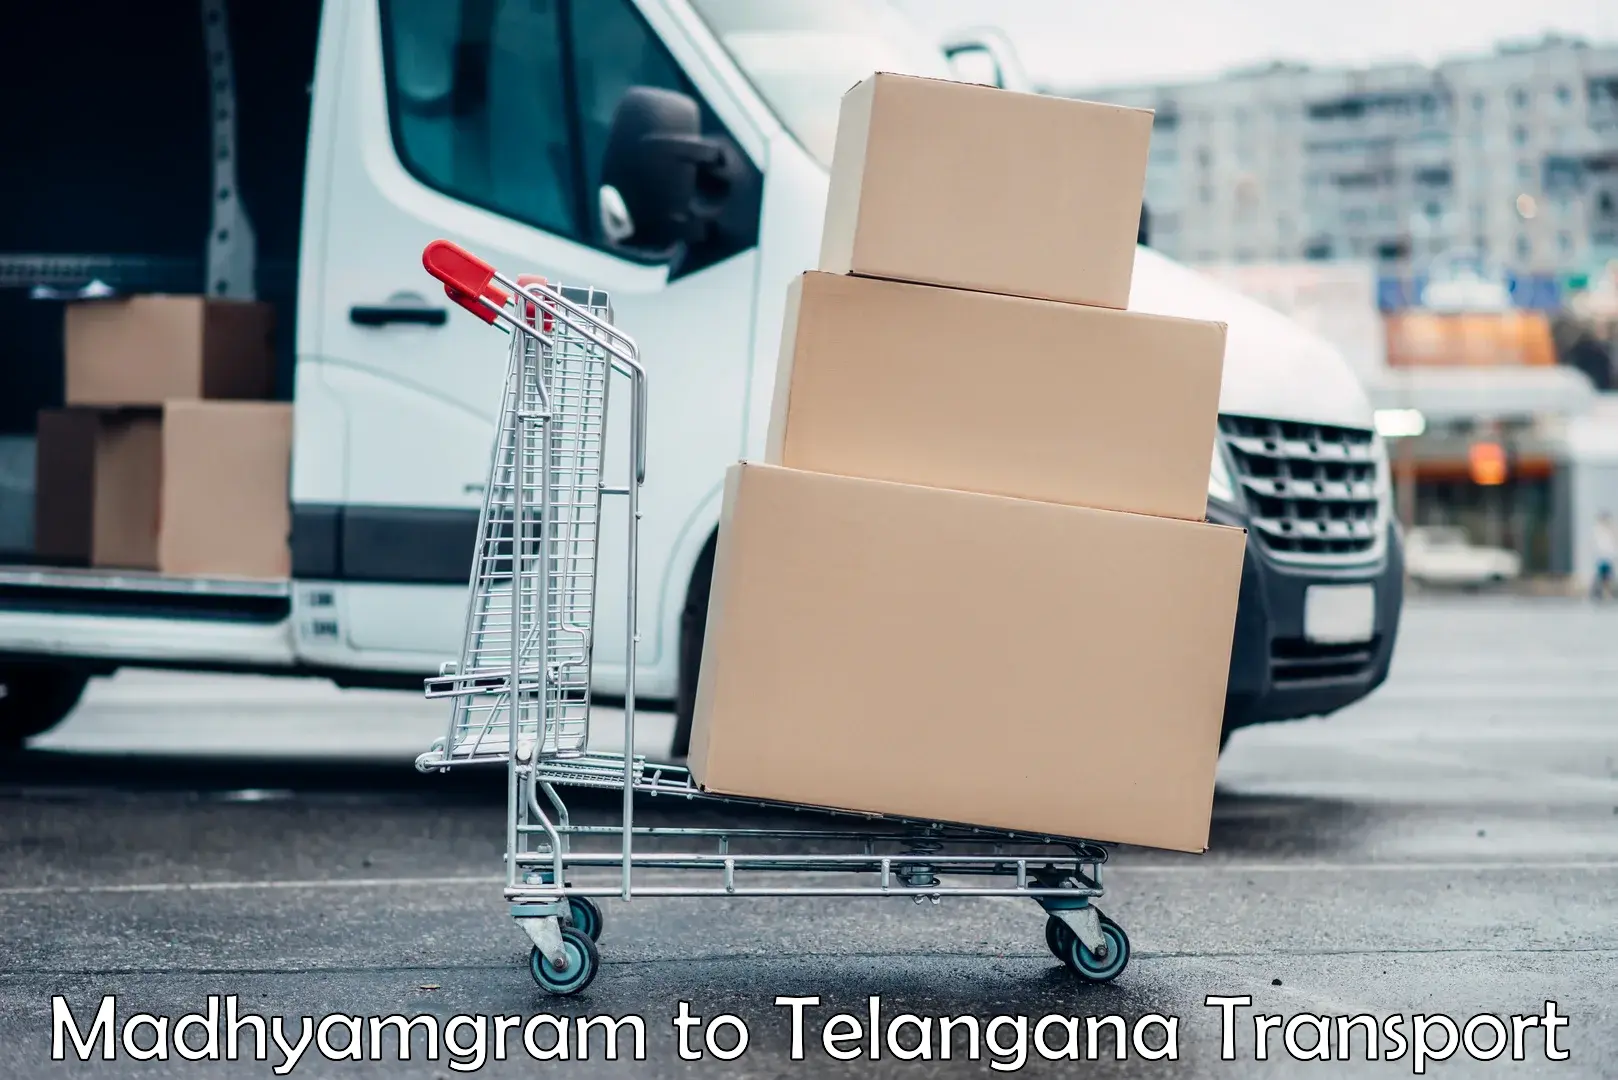 Commercial transport service Madhyamgram to Patancheru